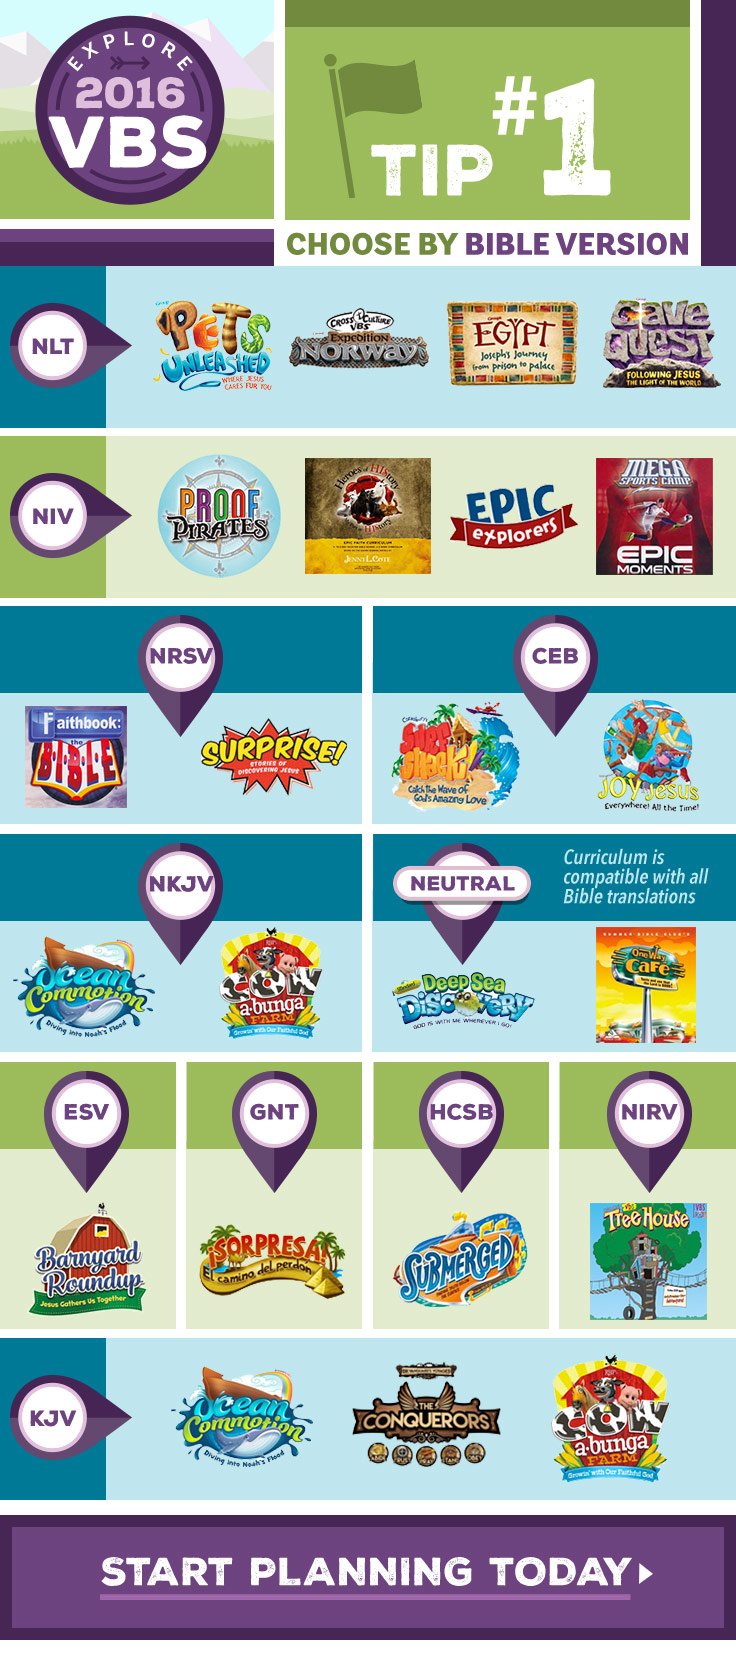 VBS Tip #1: Choose by Bible Version